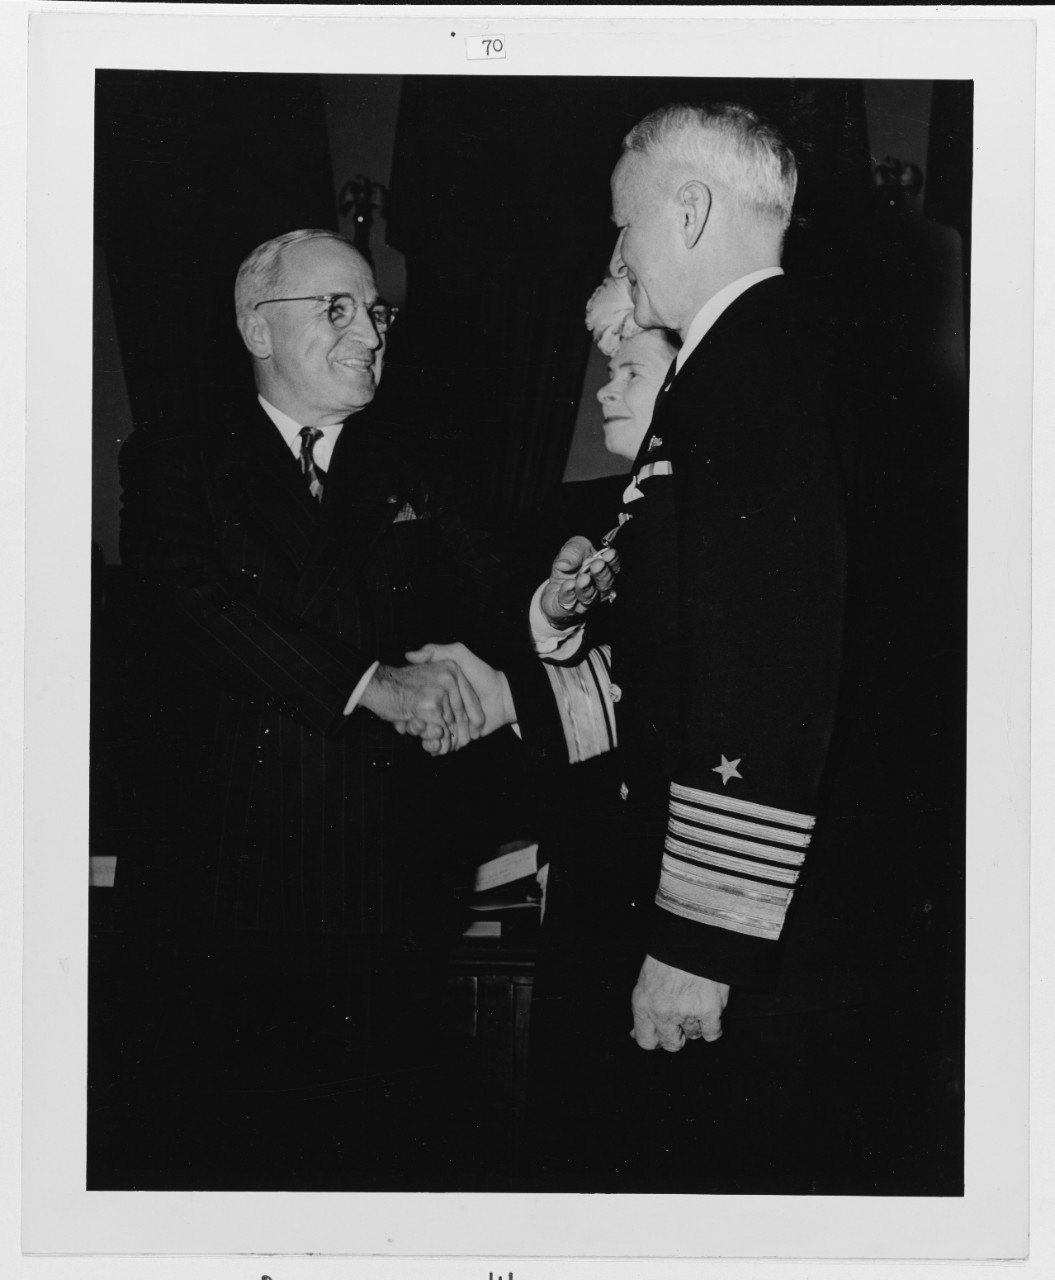 Outgoing Chief of Naval Operations, Fleet Admiral Chester W. Nimitz